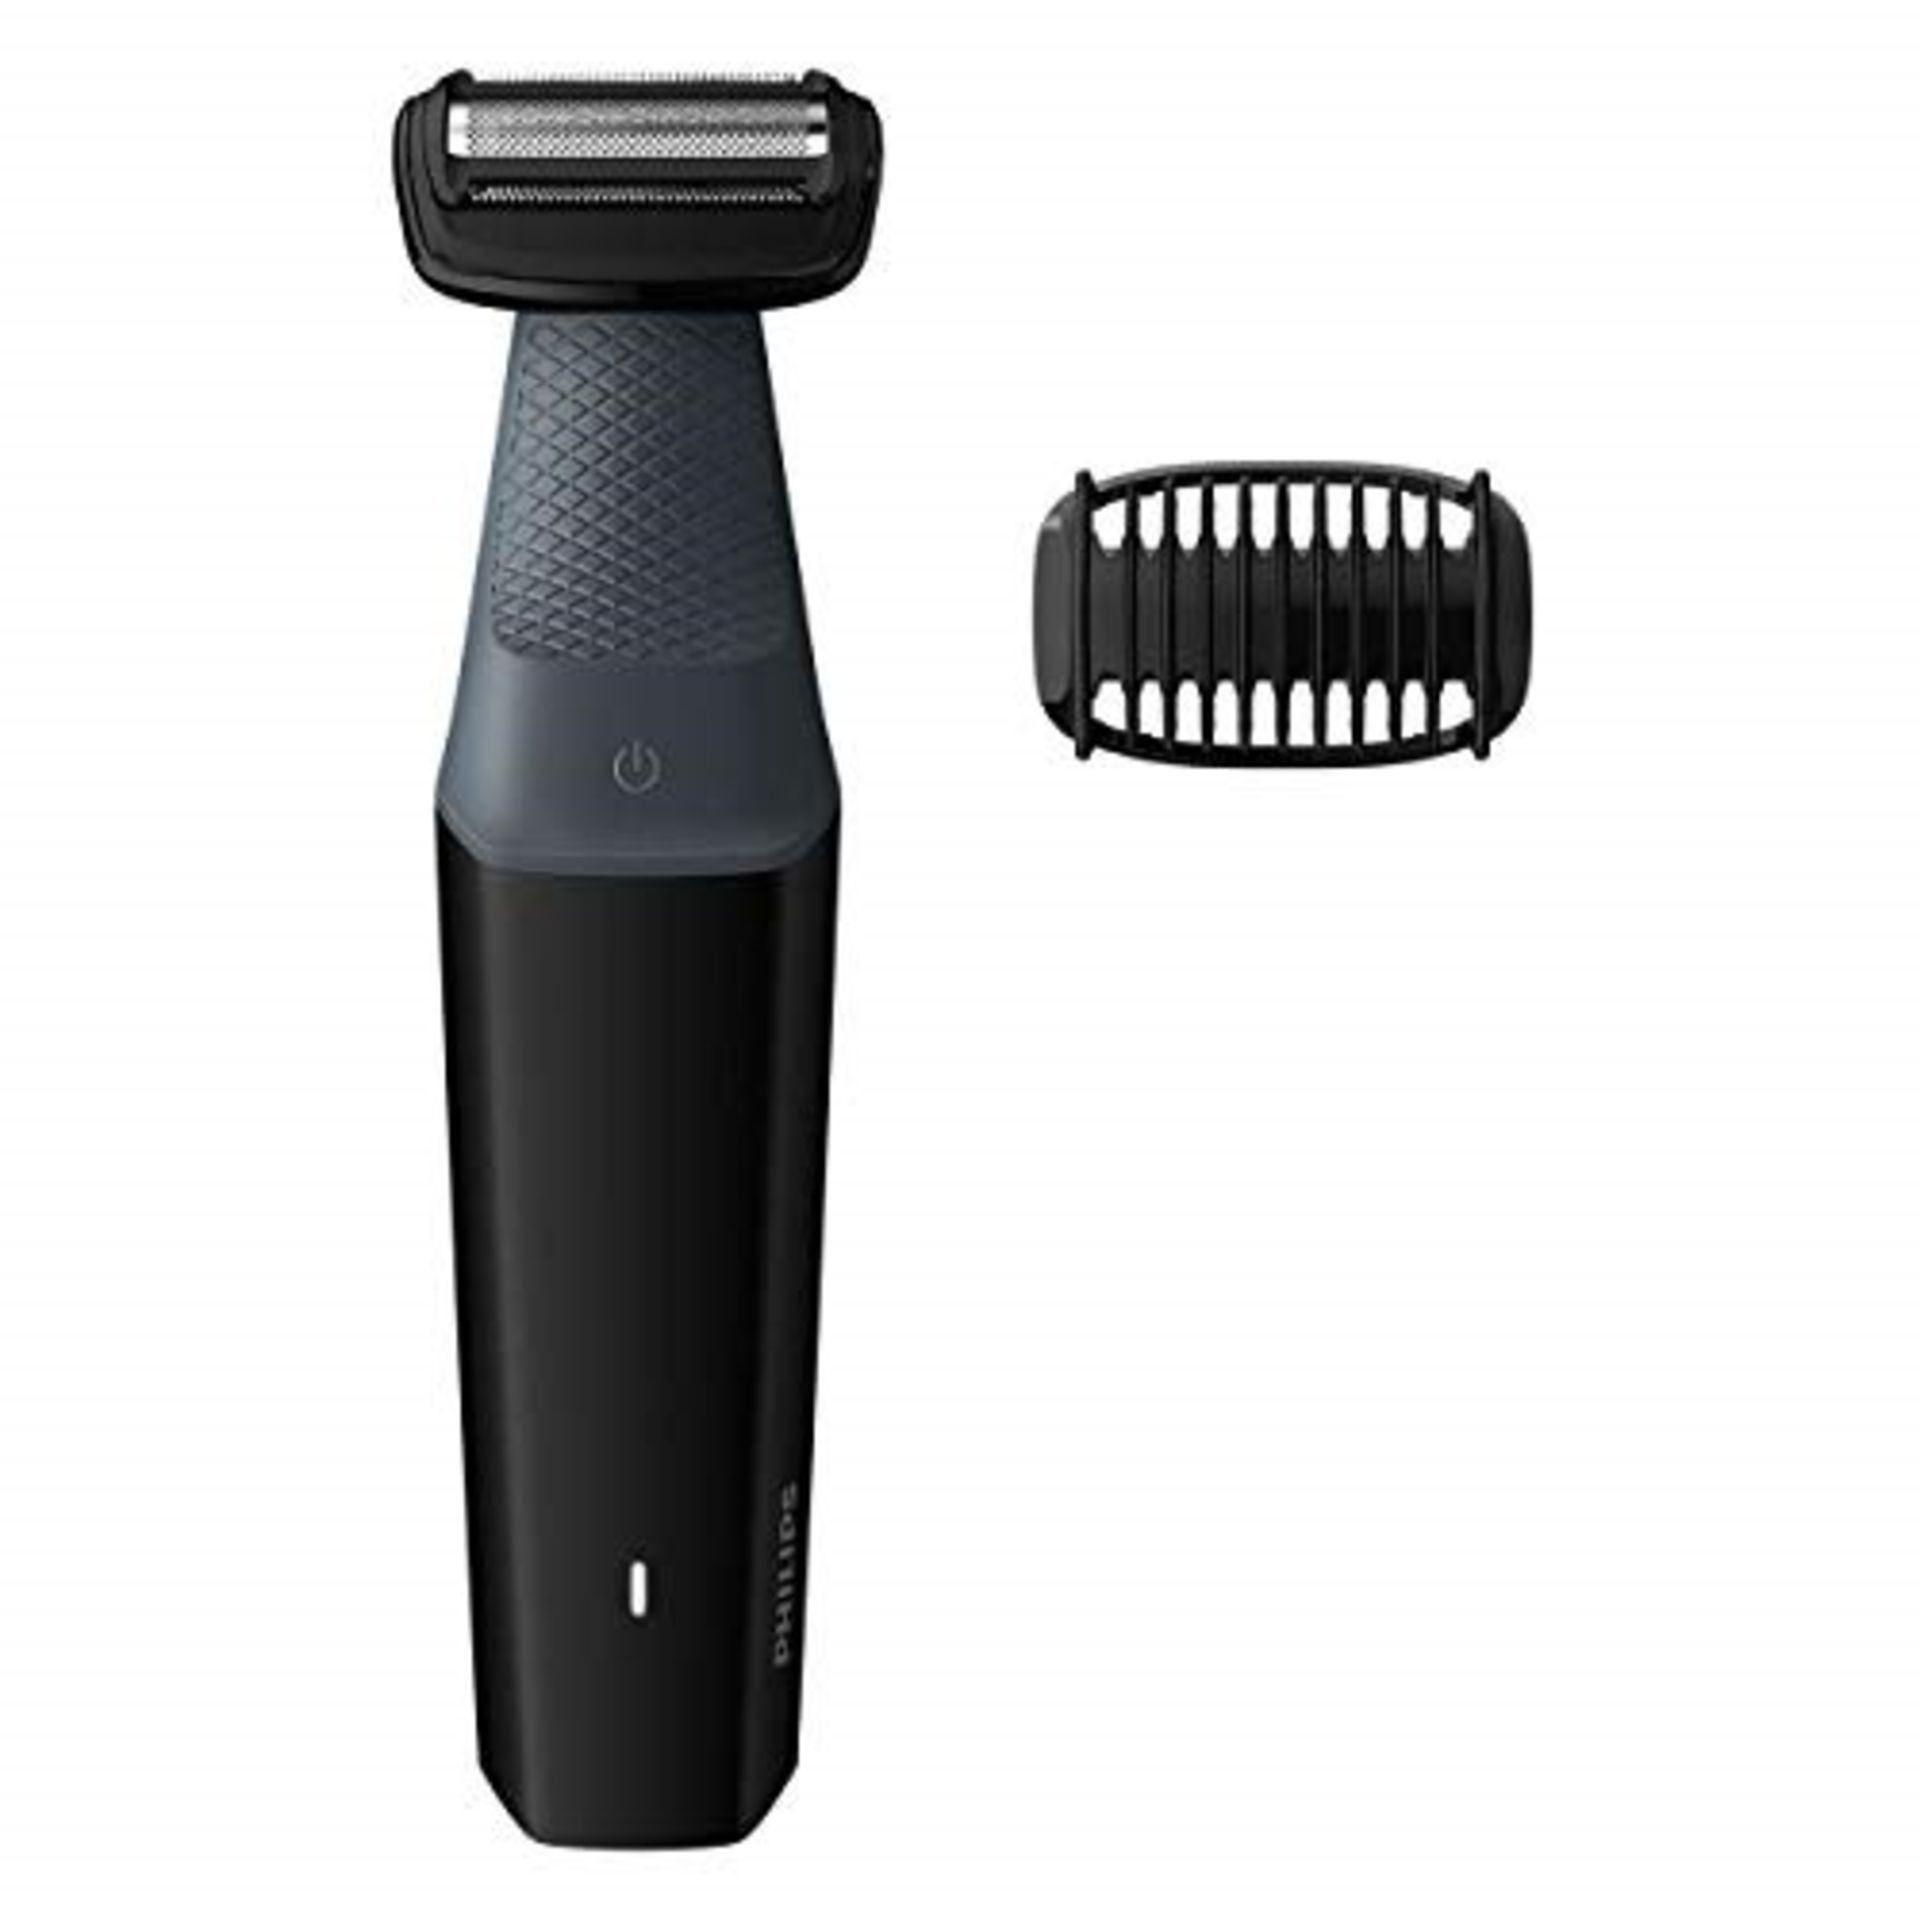 Philips Body Groomer, Series 3000, Showerproof with Skin Comfort System, Corded and Co